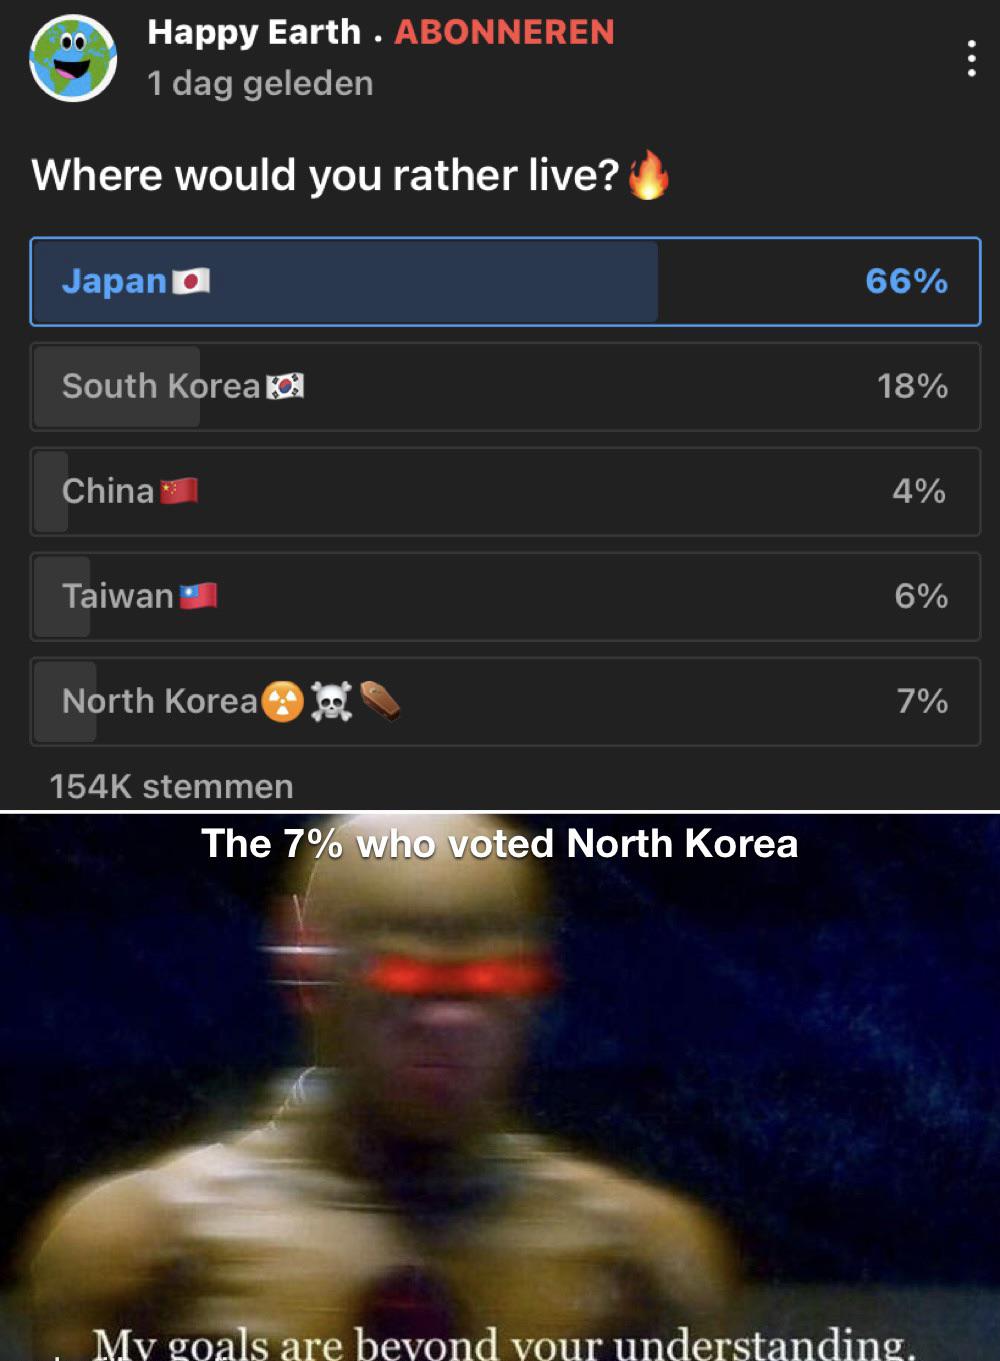 funny memes - screenshot - Happy Earth. Abonneren 1 dag geleden Where would you rather live? Japan 66% South Korea 18% China 4% Taiwan 6% North Korea 7% stemmen The 7% who voted North Korea My goals are beyond your understanding.